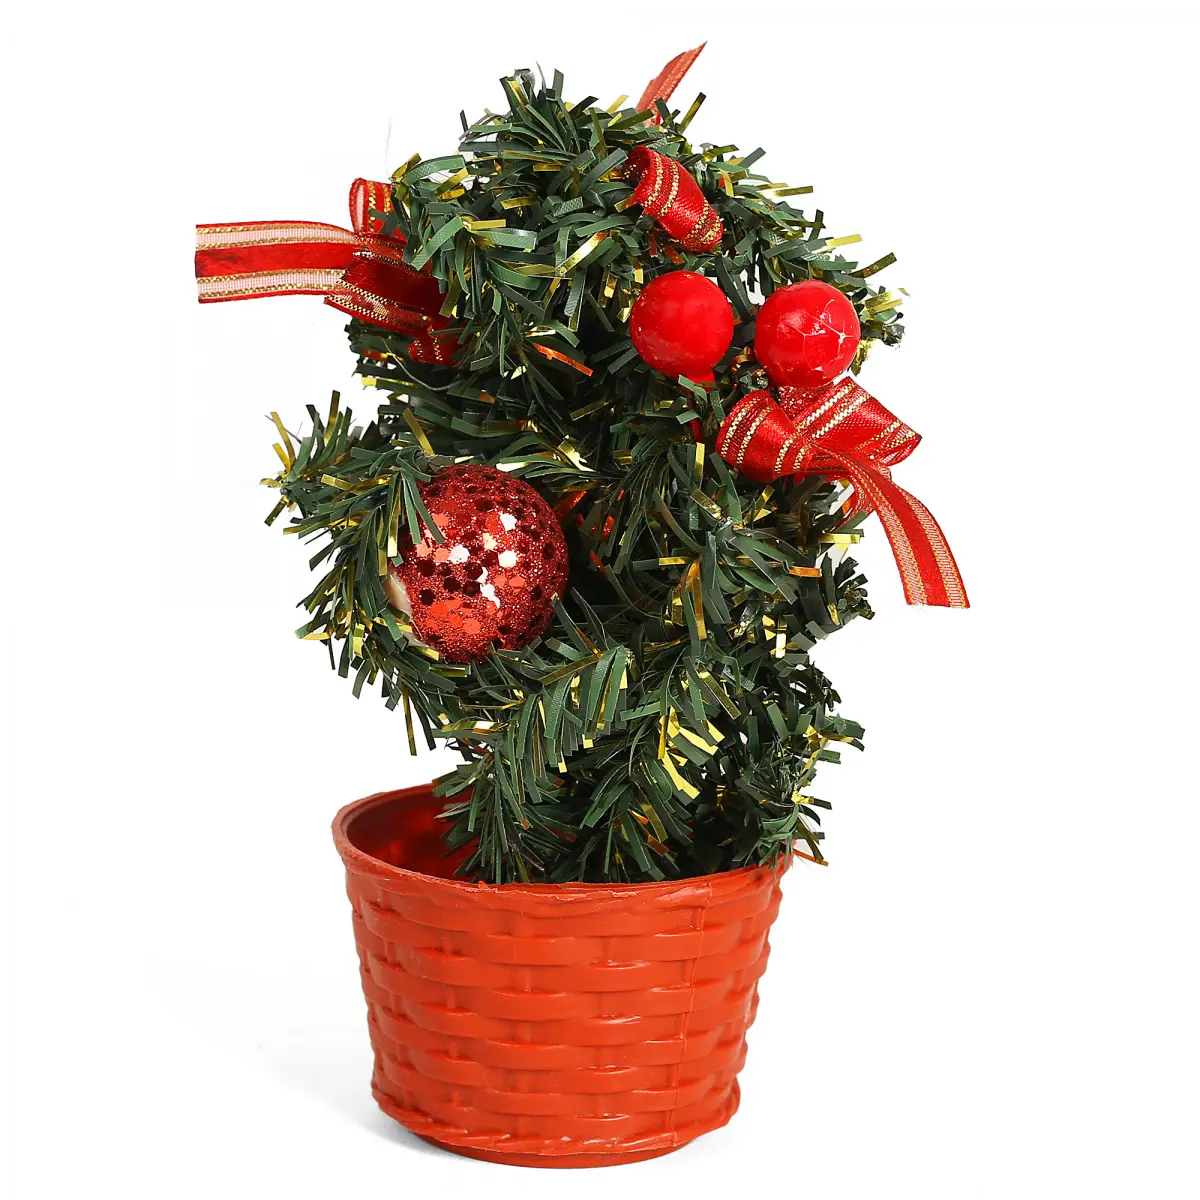 Boing Christmas Tree Decorations, 20cm, Red